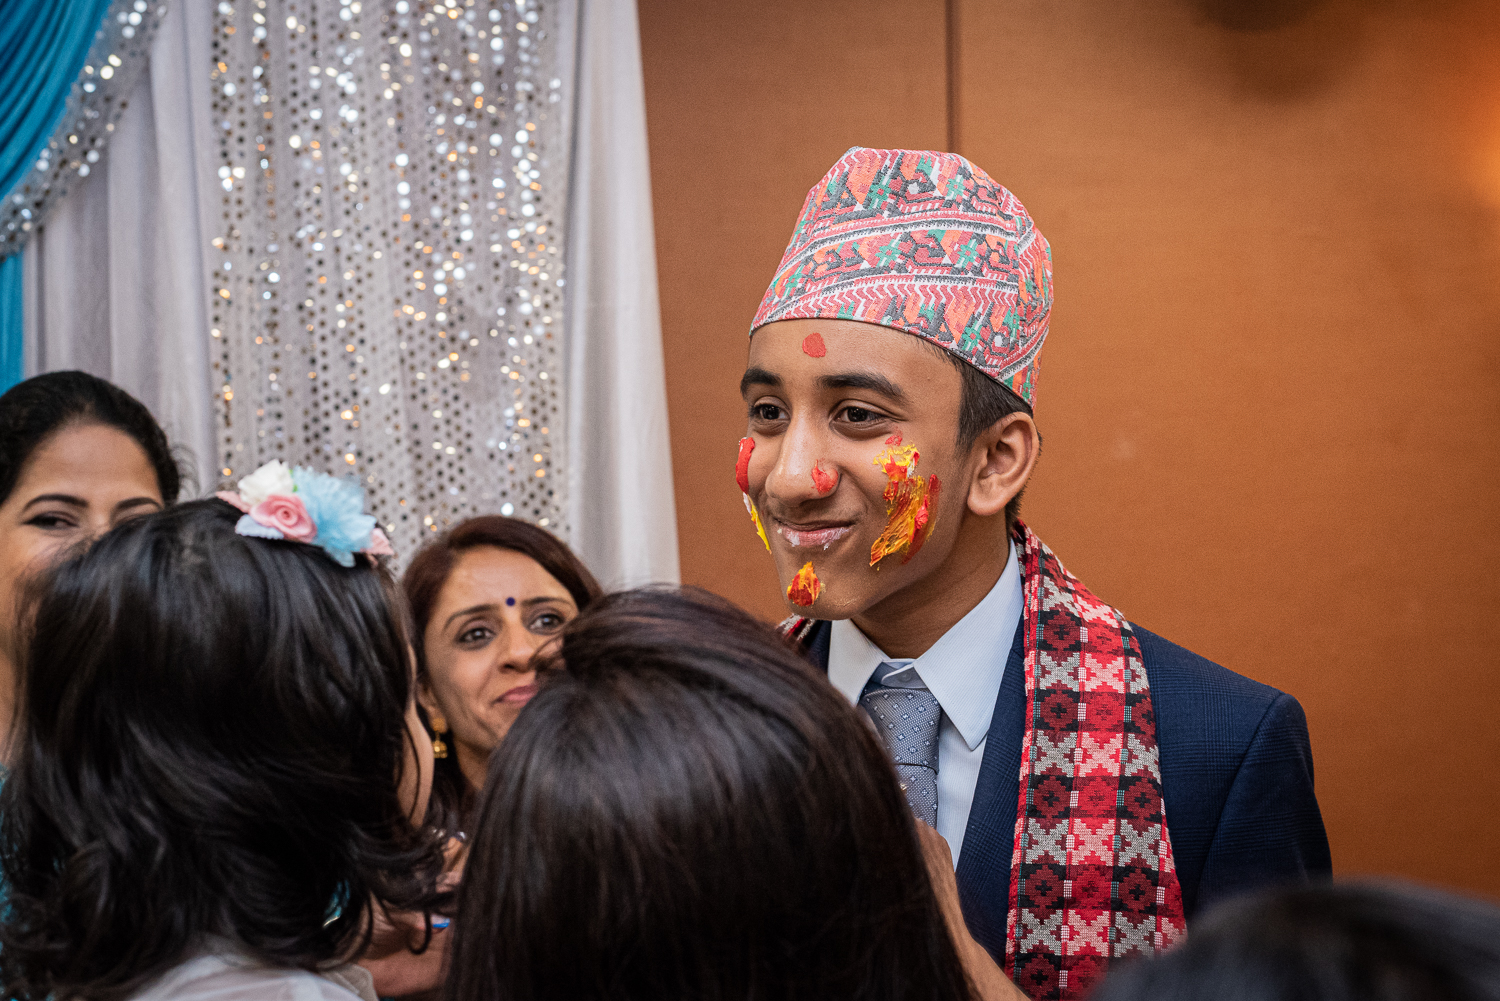 A young man at his Bratabandha ceremony with icing on his face.